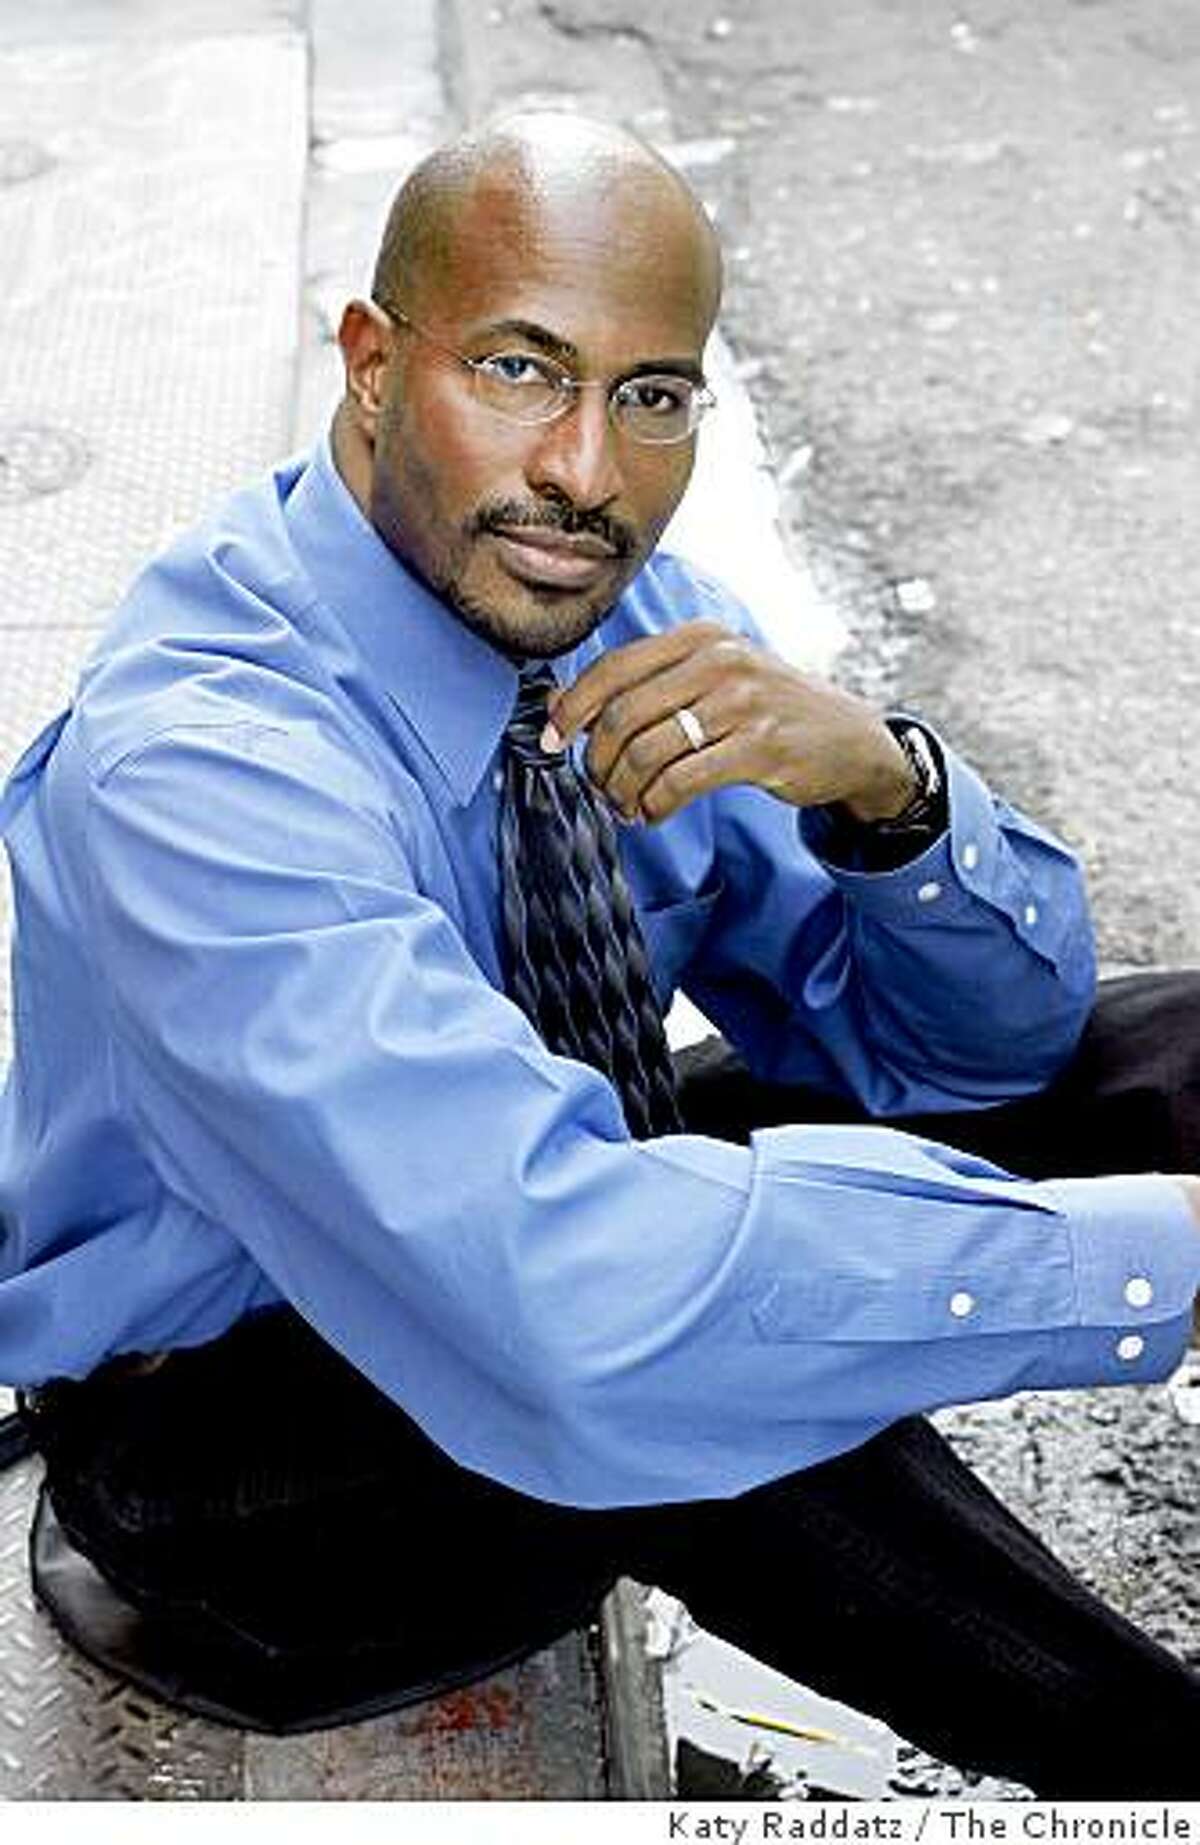 Van Jones founded Green for All, an environmental organization in Oakland, Calif., which integrates lower income folks into the environmental movement by providing them with jobs. We speak to Van Jones in Oakland, Calif. on Monday, April 28, 2008.Photo by Katy Raddatz / San Francisco Chronicle